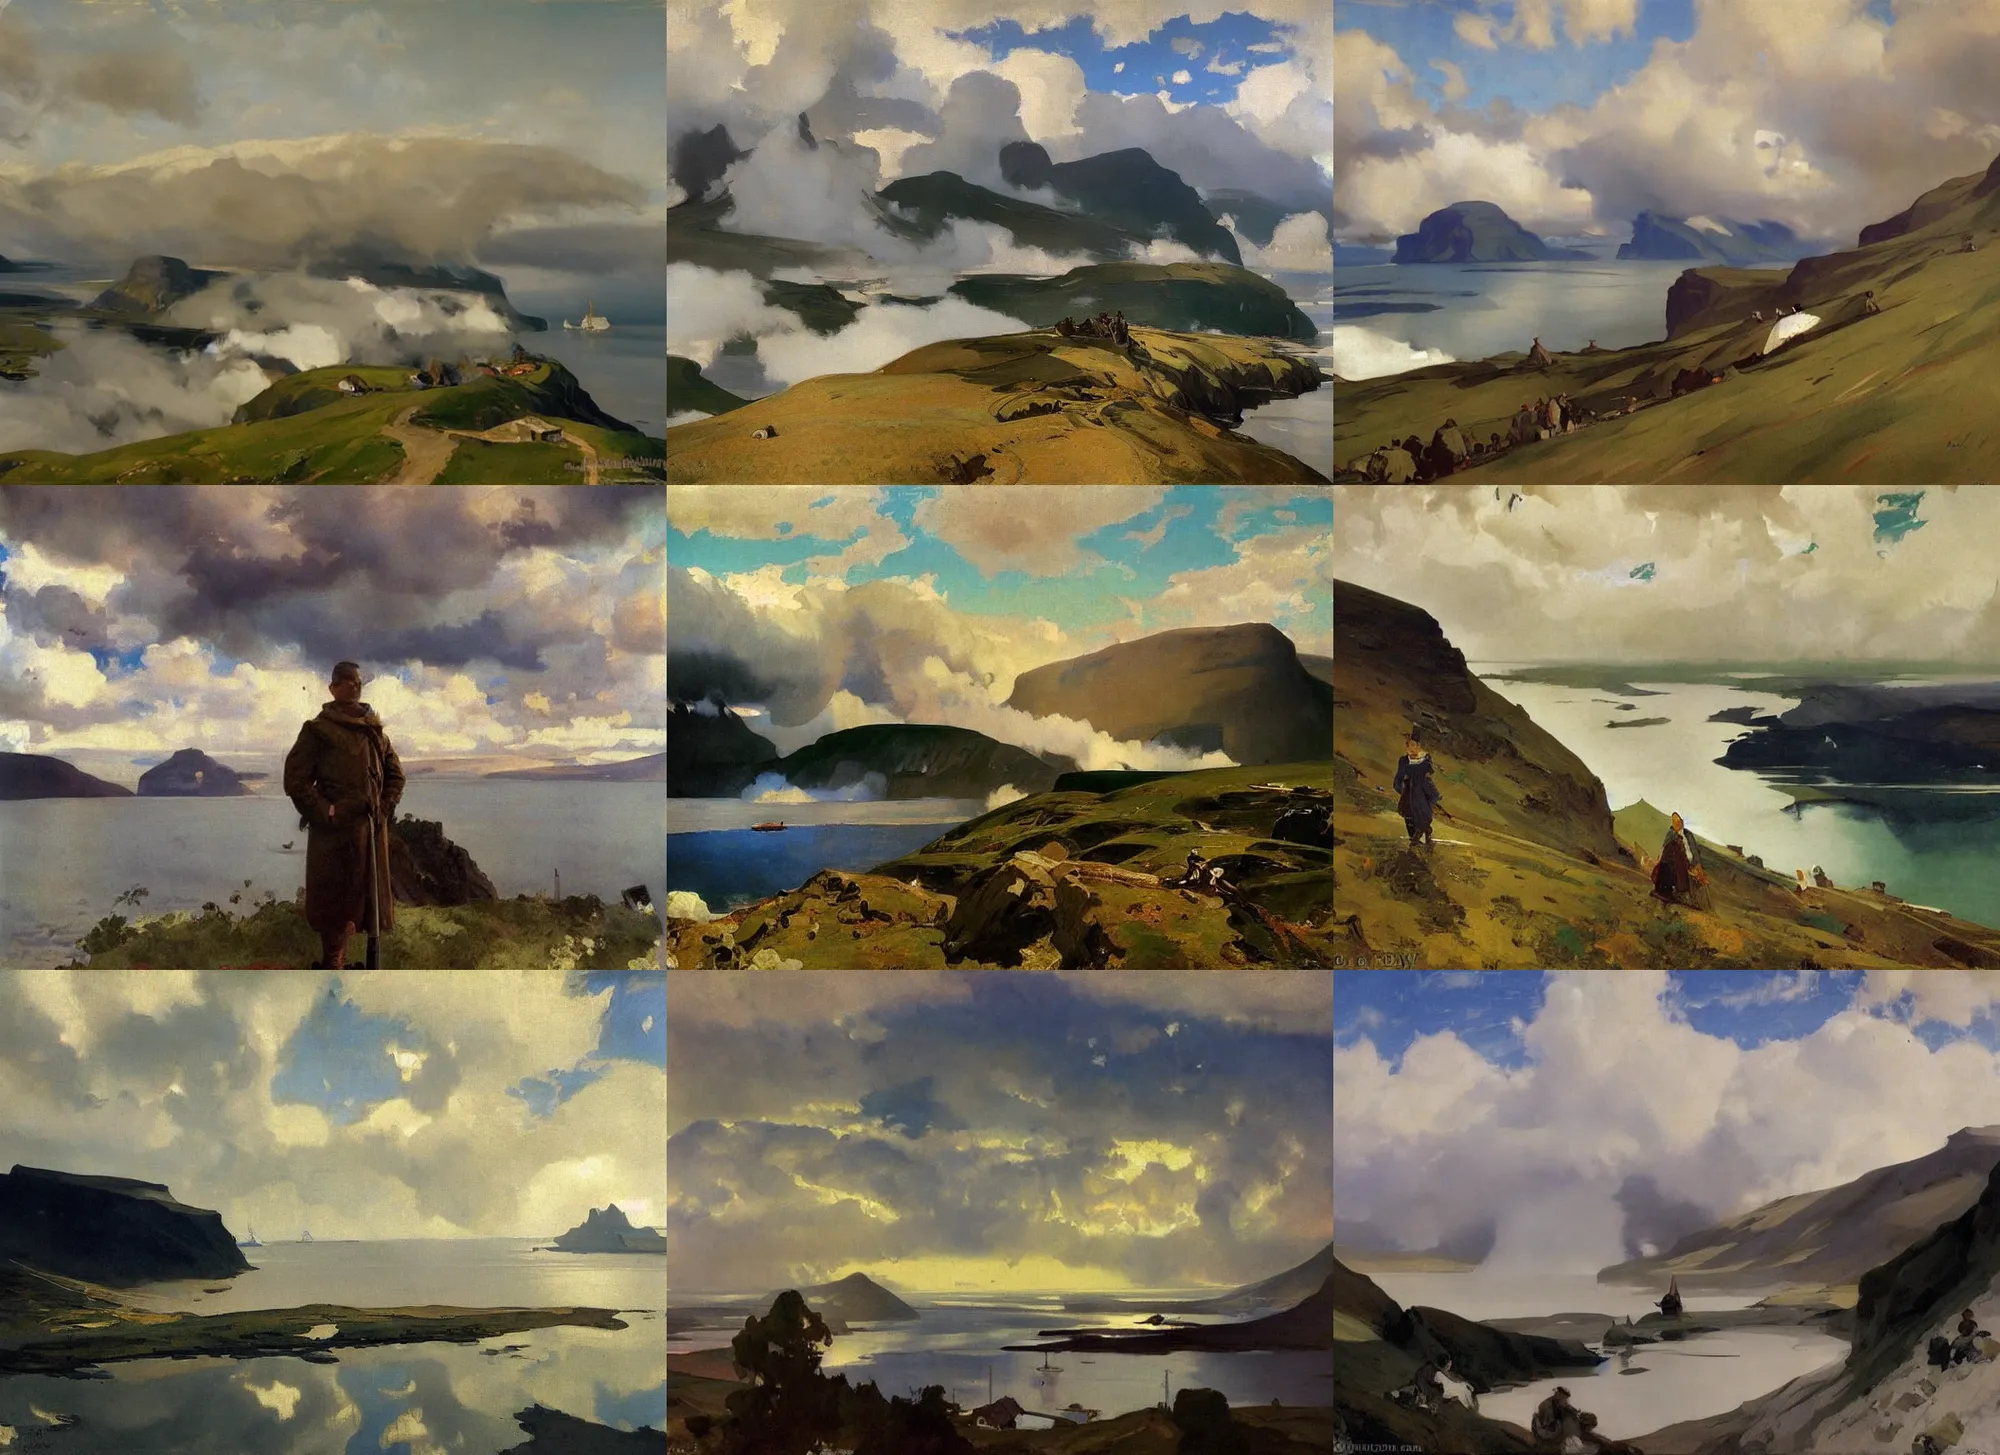 Prompt: painting by sargent leyendecker and gurney, vasnetsov, savrasov levitan polenov, middle ages, above the layered low clouds big lake wide river road to sea bay view faroe azores overcast